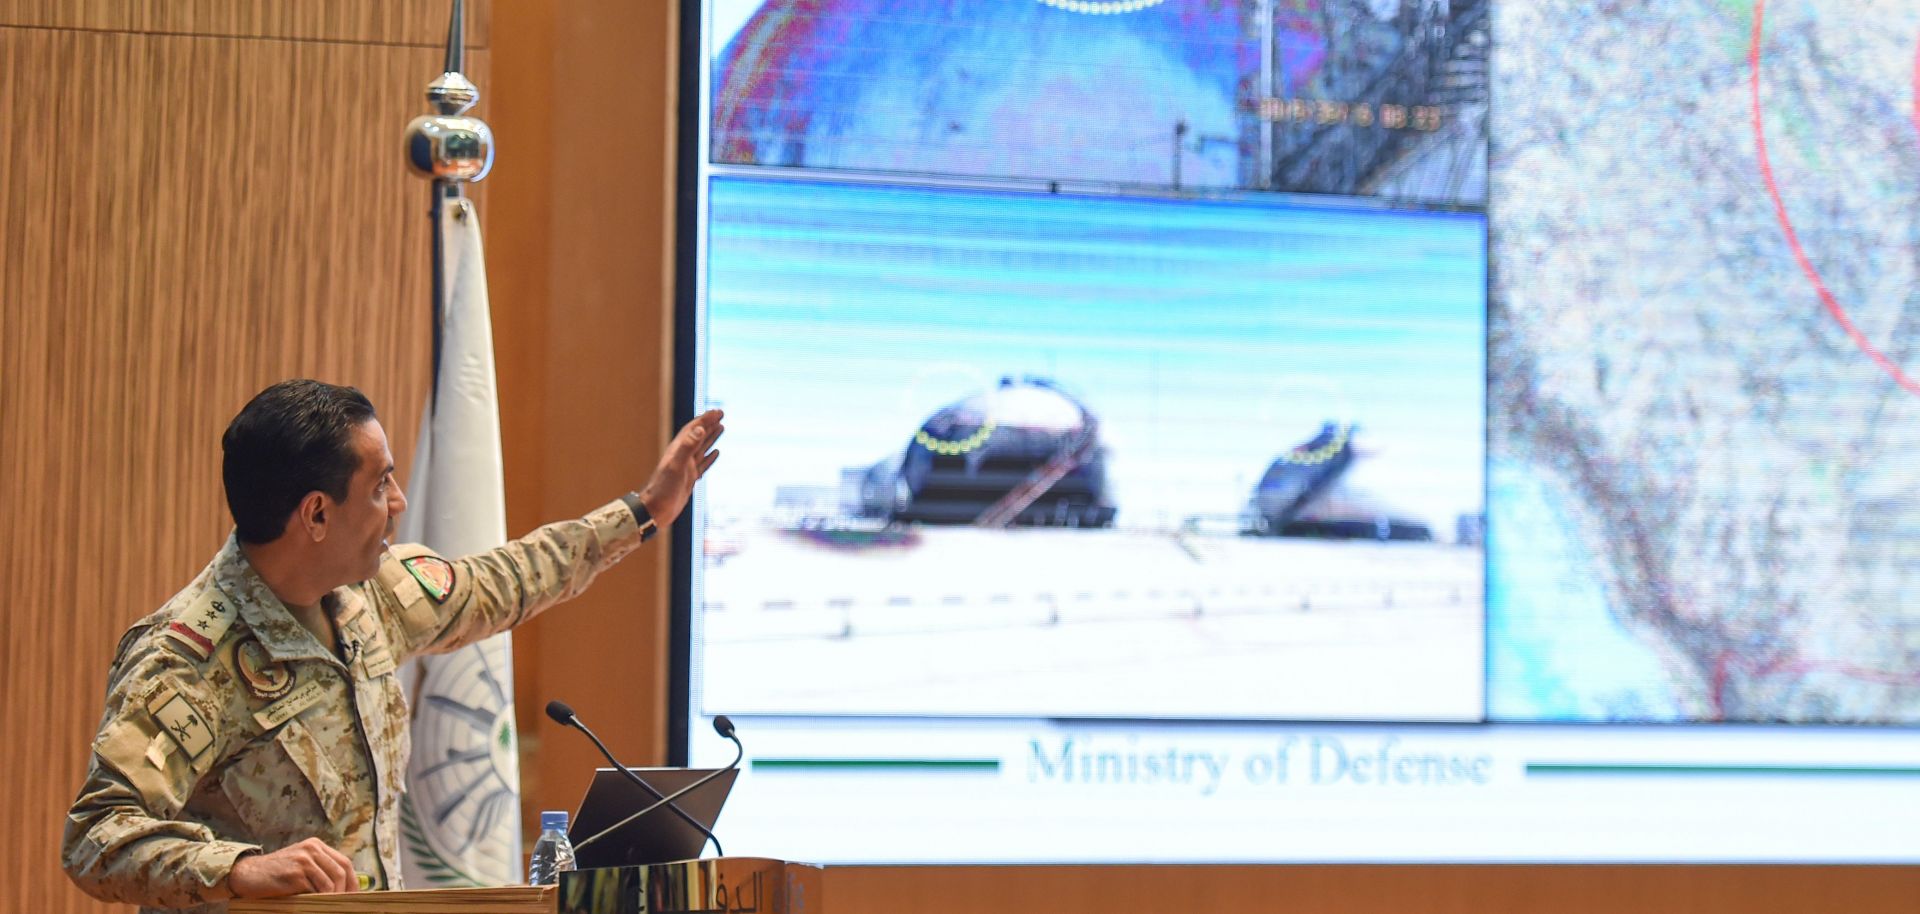 A Saudi Defense Ministry official speaks in Riyadh on Sept. 18, 2019, following Sept. 14 attacks on Saudi Aramco facilities in Abqaiq and Khurais.